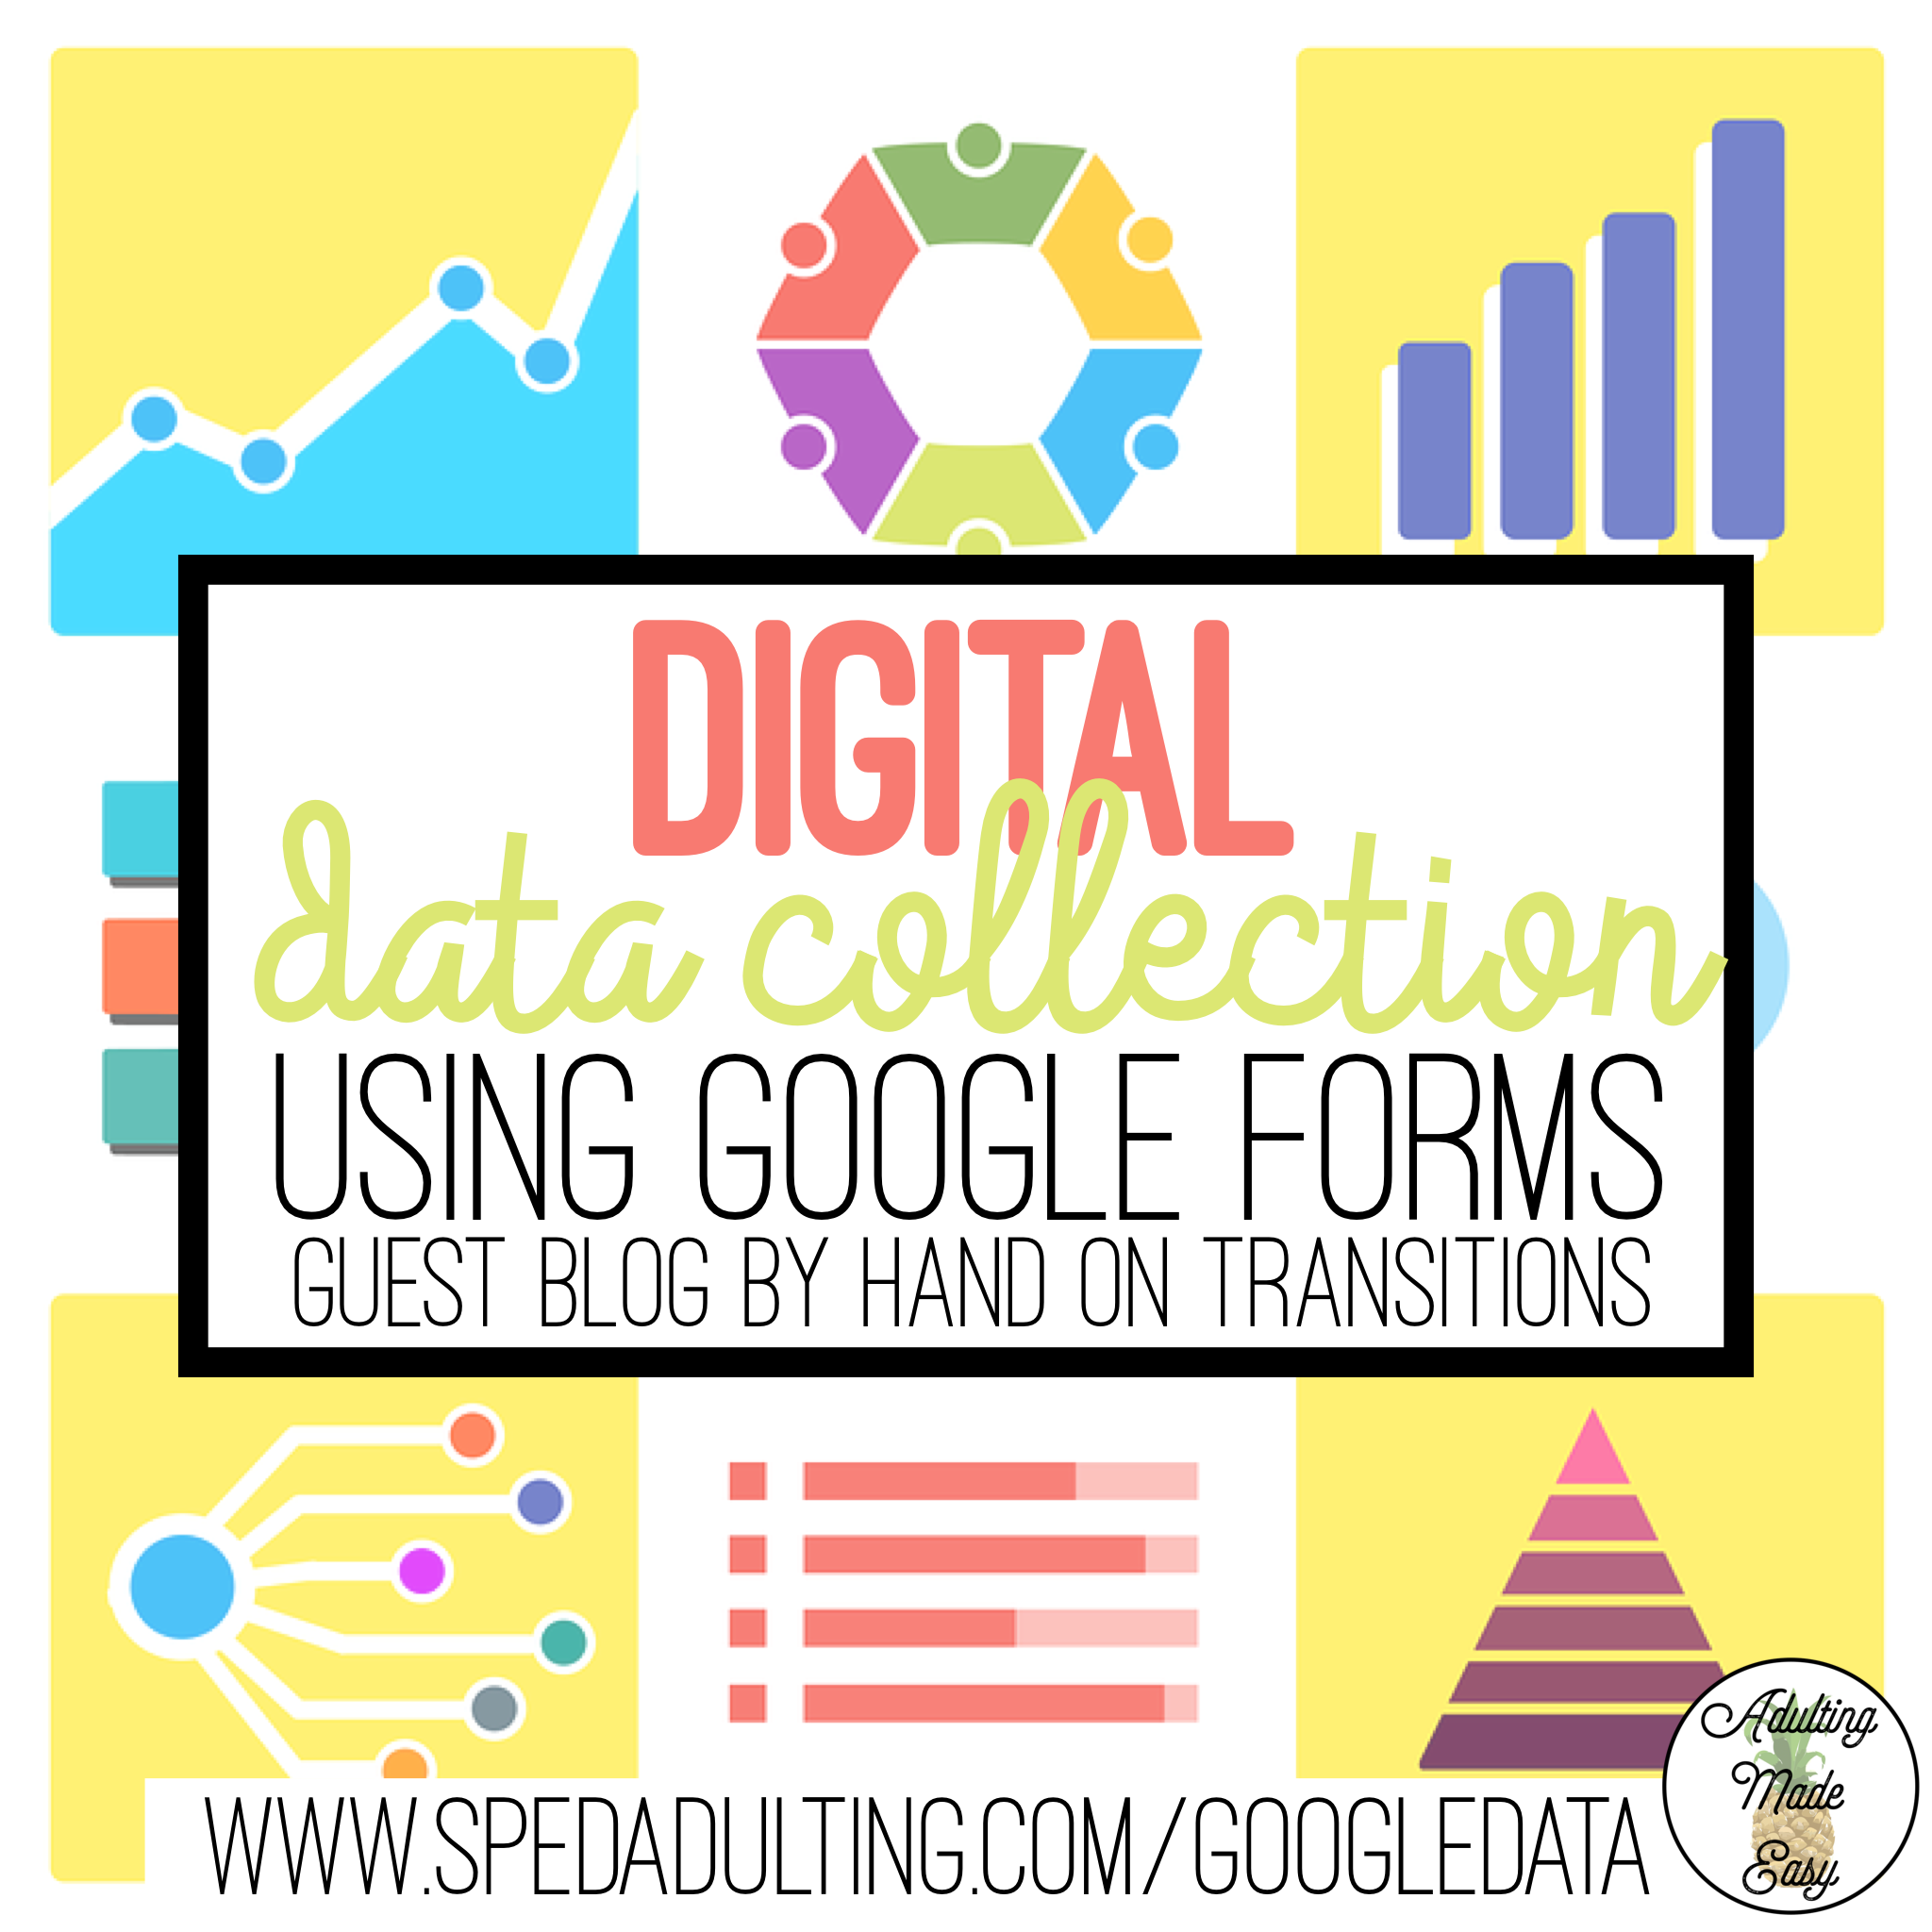 BLOG: Digital Data Collection Using Google Forms